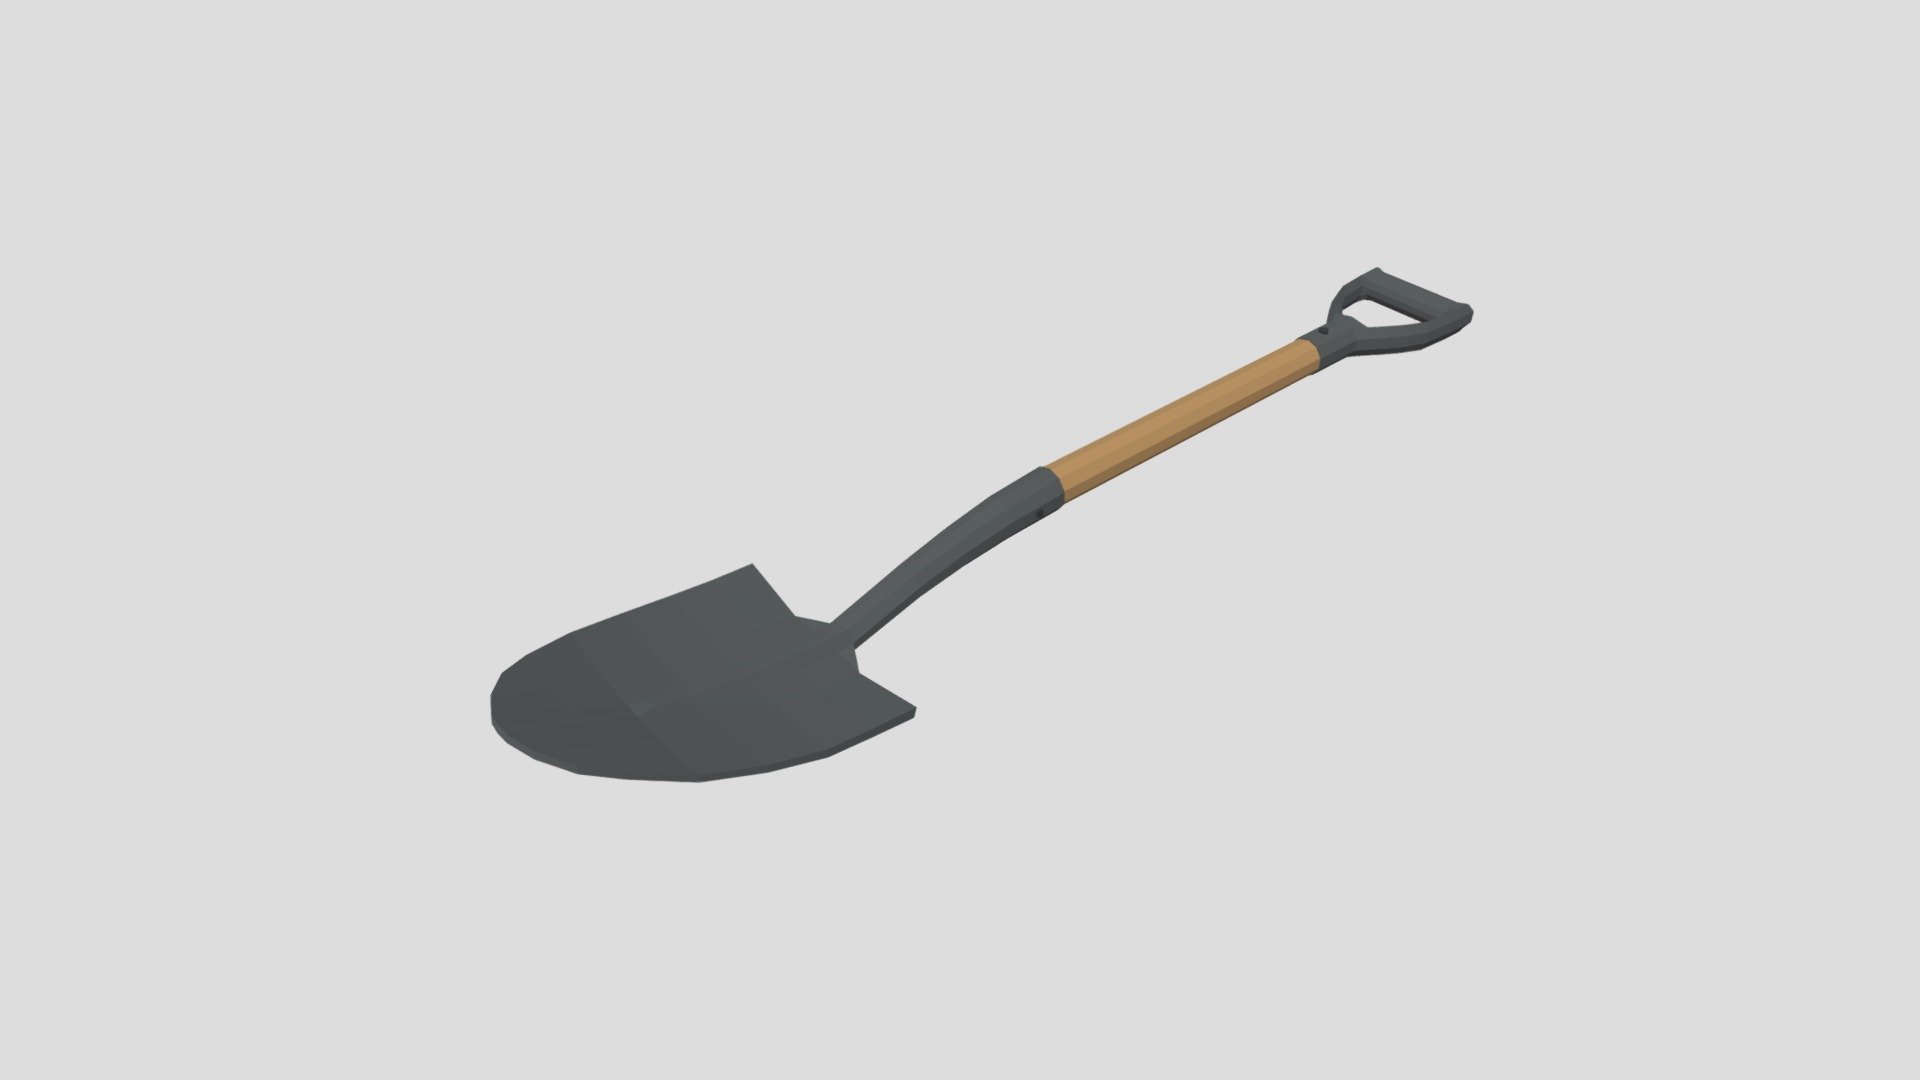 This is a low poly 3D model of a shovel. The low poly shovel was modeled and prepared for low-poly style renderings, background, general CG visualization presented as 1 mesh with quads only.

Verts : 404 Faces : 396.

The 3D model have simple materials with diffuse colors.

No ring, maps and no UVW mapping is available.

The original file was created in blender. You will receive a 3DS, OBJ, FBX, blend, DAE, Stl, gLTF.

All preview images were rendered with Blender Cycles.  Product is ready to render out-of-the-box. Please note that the lights, cameras, and background is only included in the .blend file. The model is clean and alone in the other provided files, centred at origin and has real-world scale 3d model